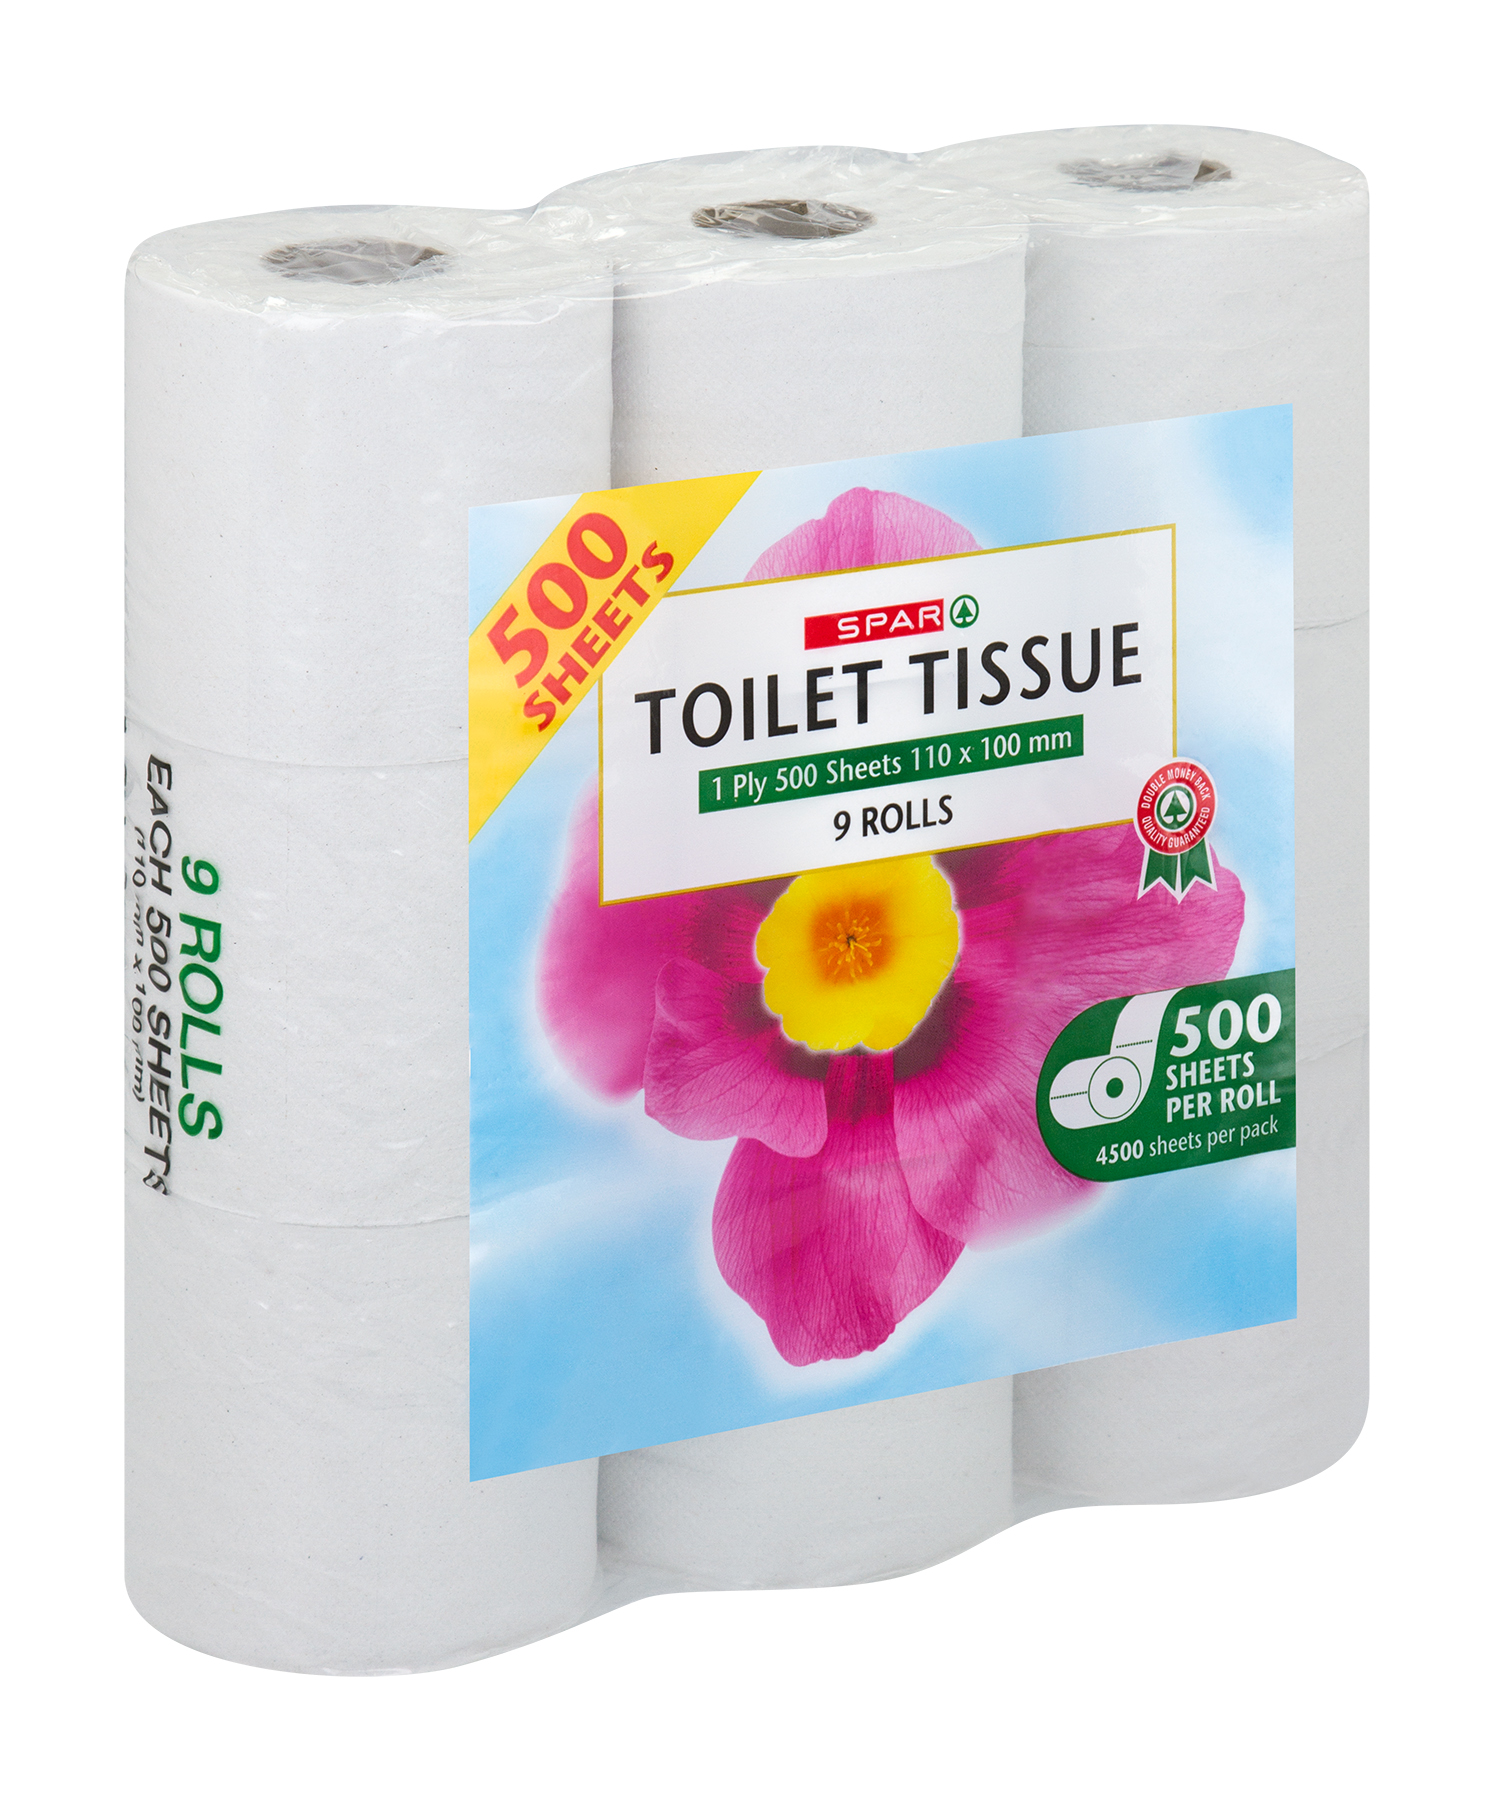 toilet rolls 1 ply 9s 500 sheets 